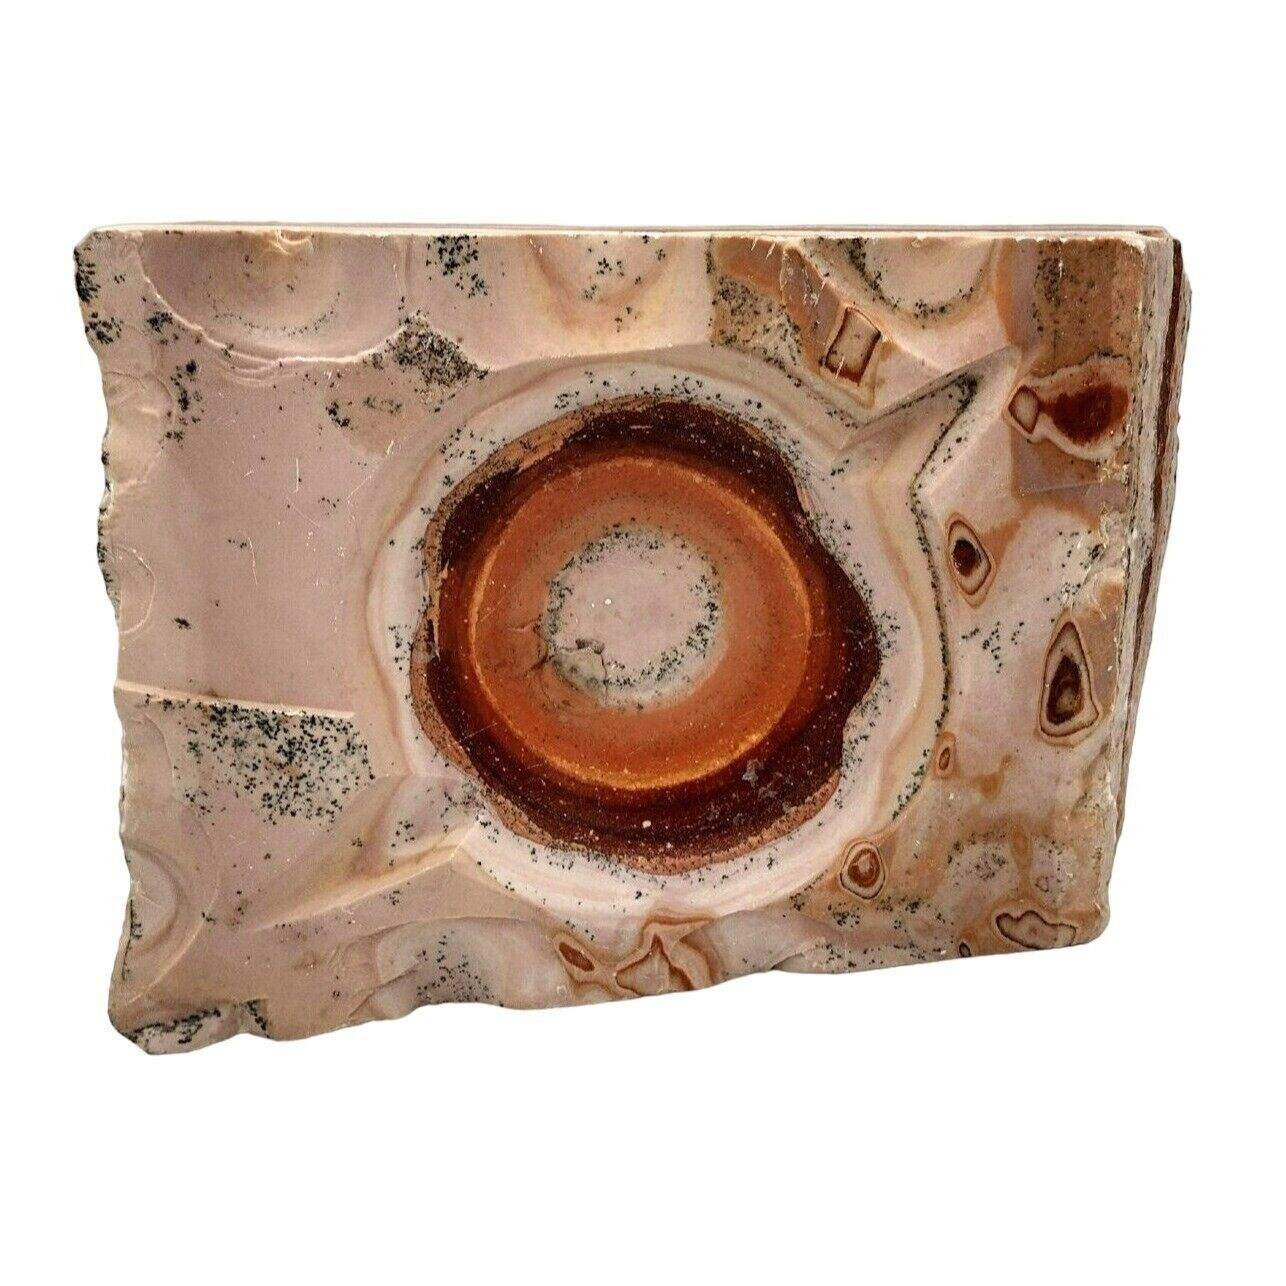 Ashtray Polished Stone Multicolor Layered Natural 10x7 inches Unique Vintage